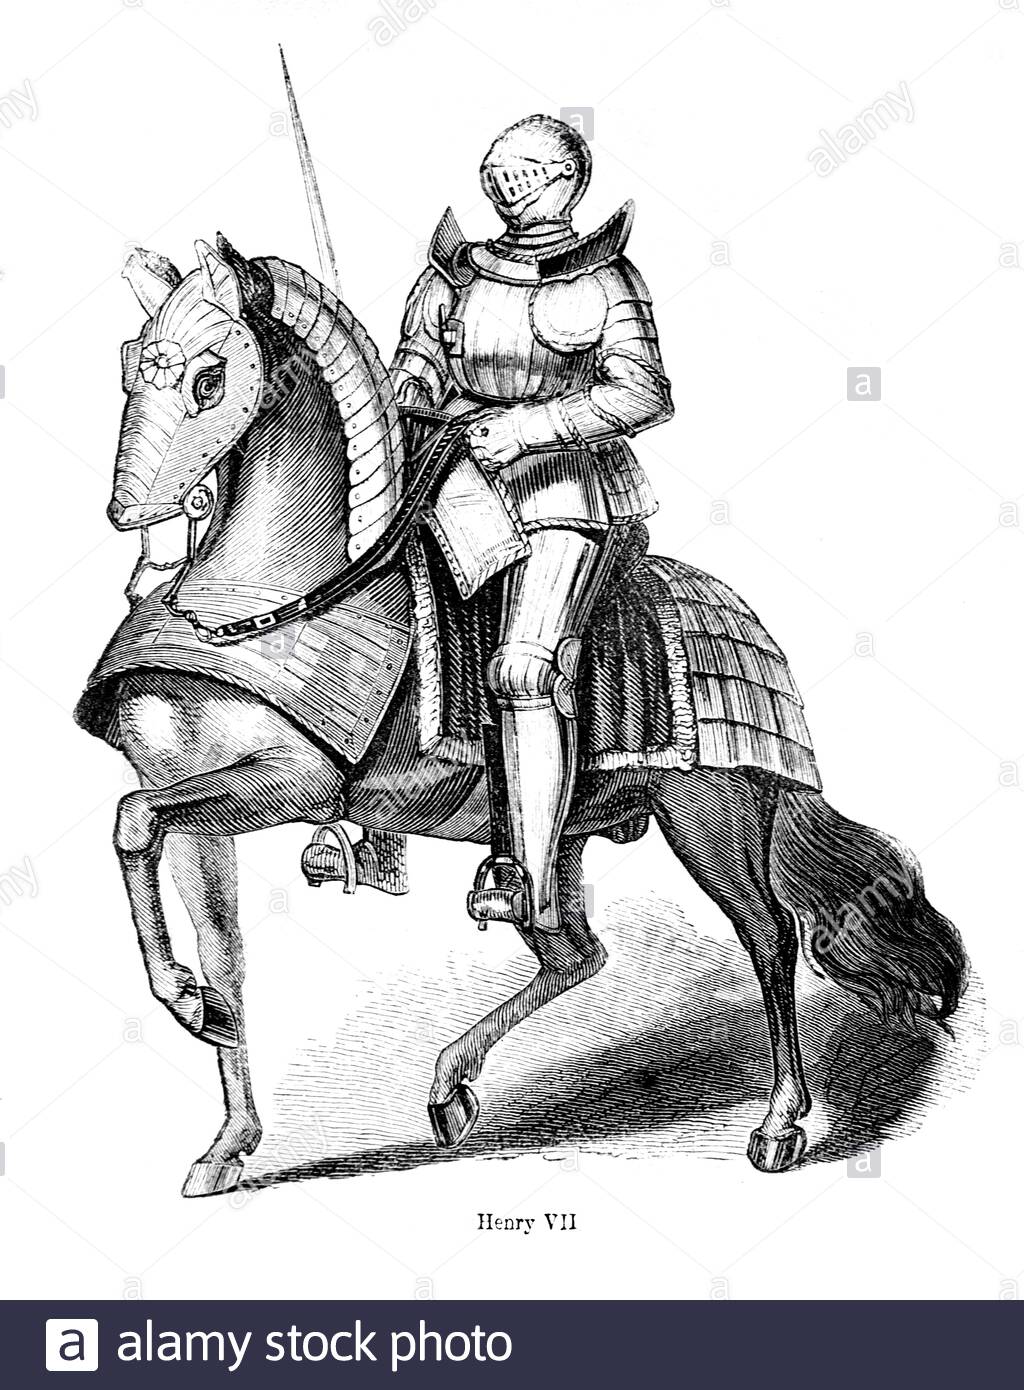 Medieval Knight on horseback wearing a suit of armour from the period of Henry VII, vintage illustration from the 1800s Stock Photo